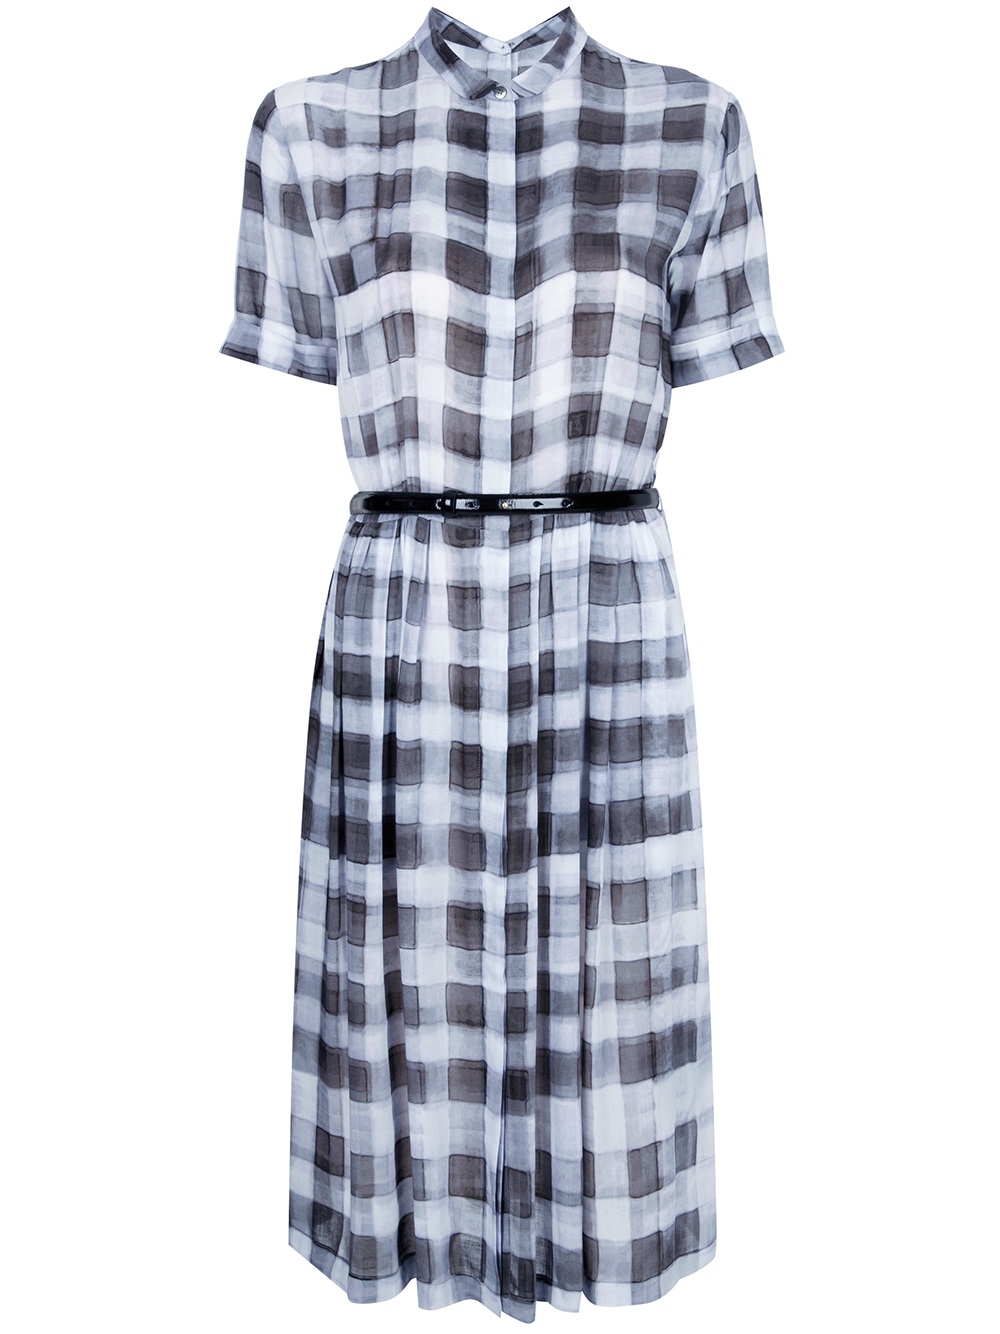 Paul Smith Black Label Checked Dress in Grey (Gray) | Lyst